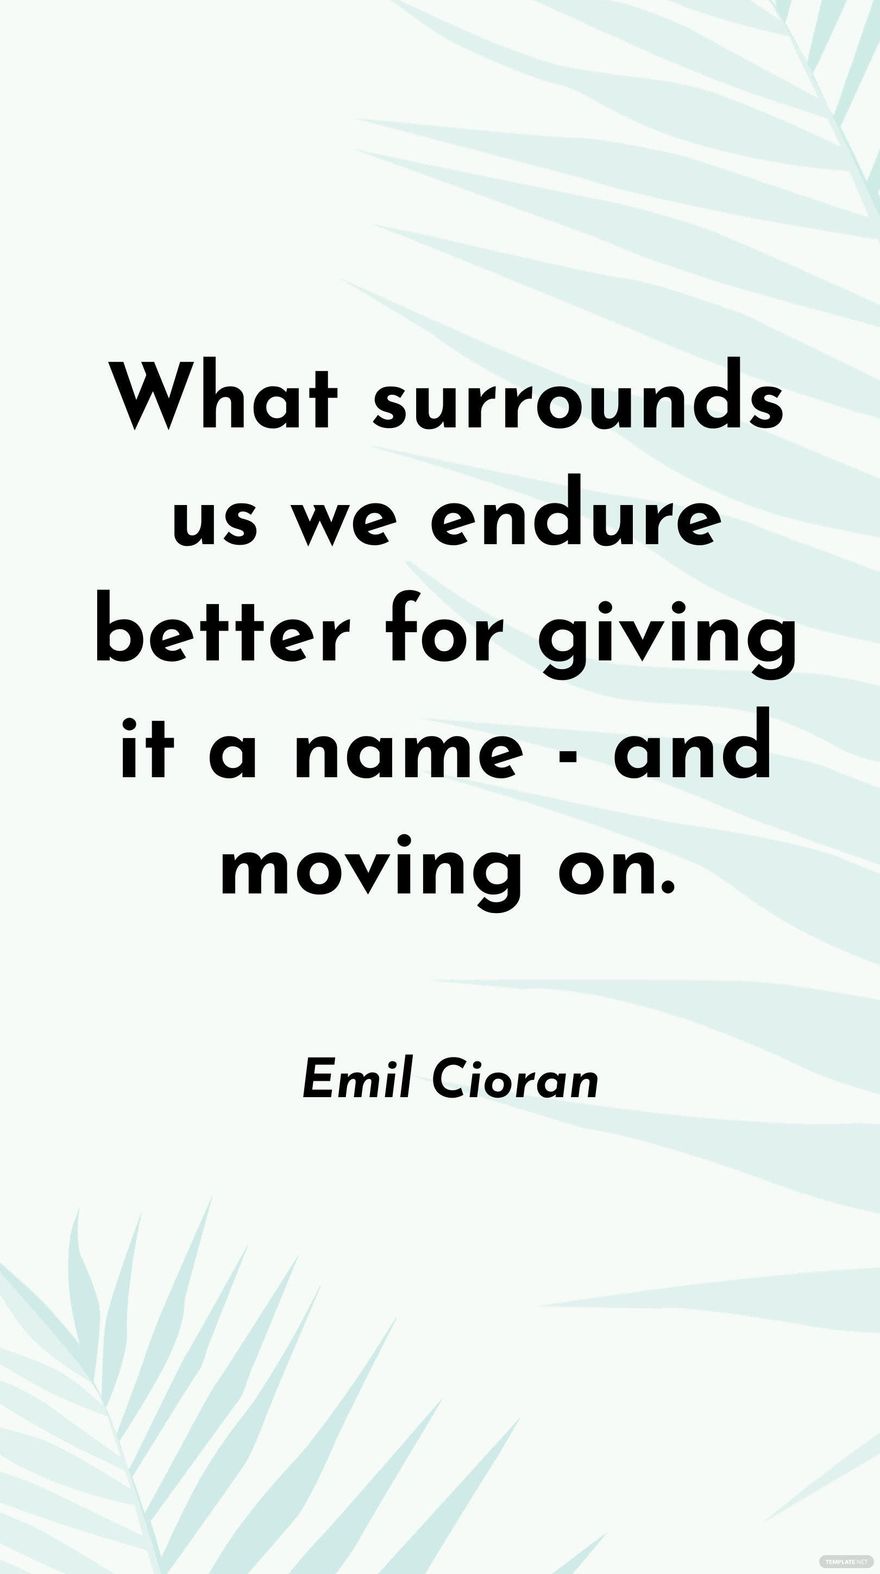 Emil Cioran - What surrounds us we endure better for giving it a name - and moving on. in JPG